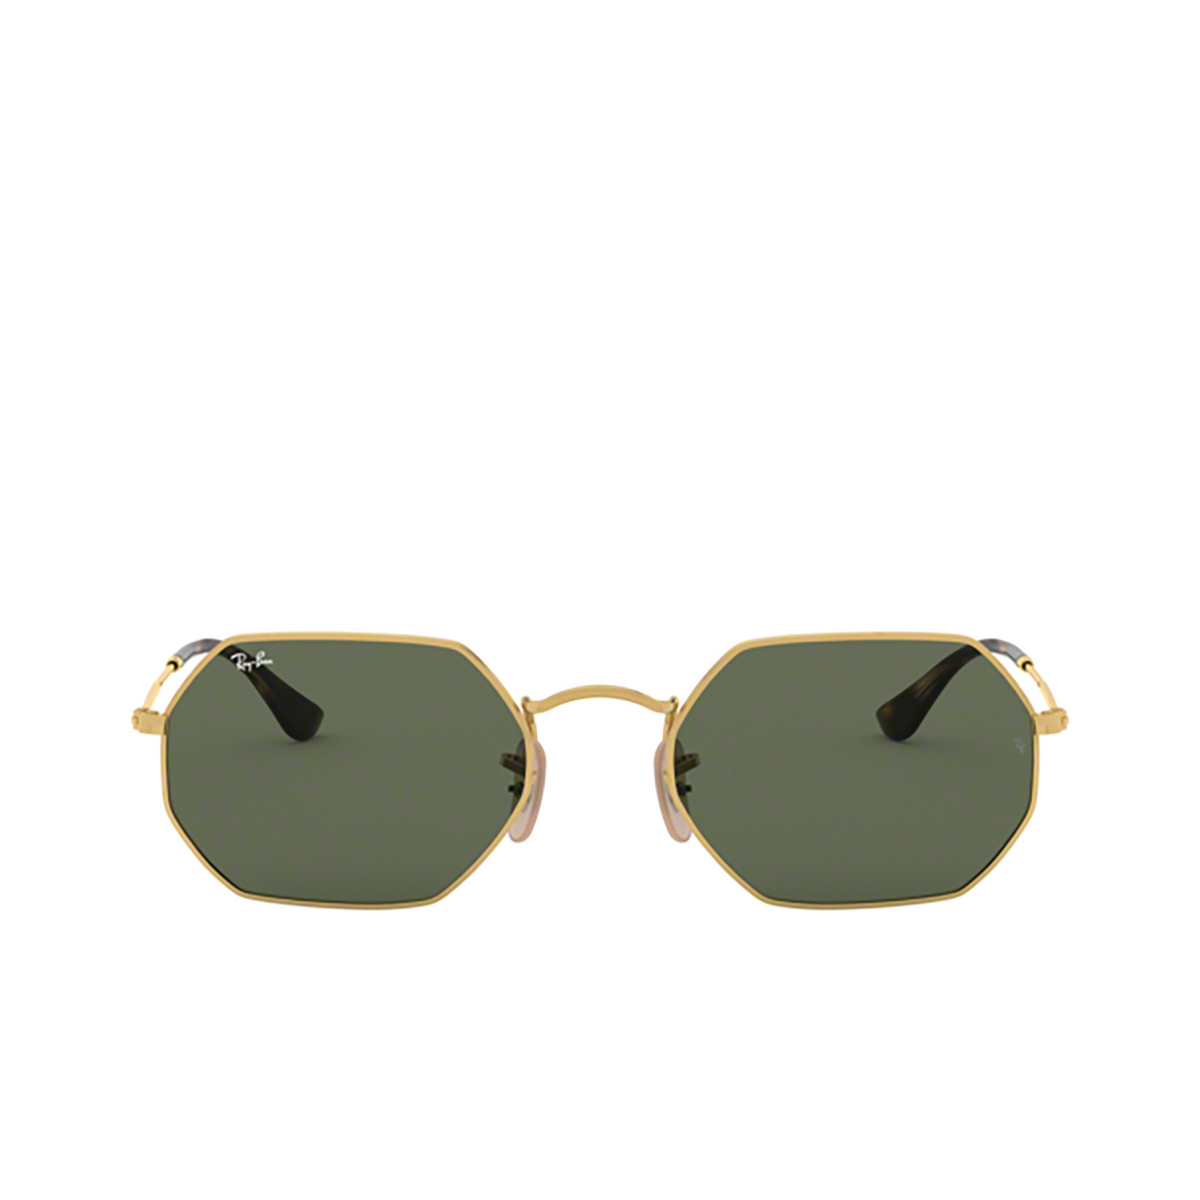 Ray-Ban OCTAGONAL Sunglasses 001 ARISTA - front view